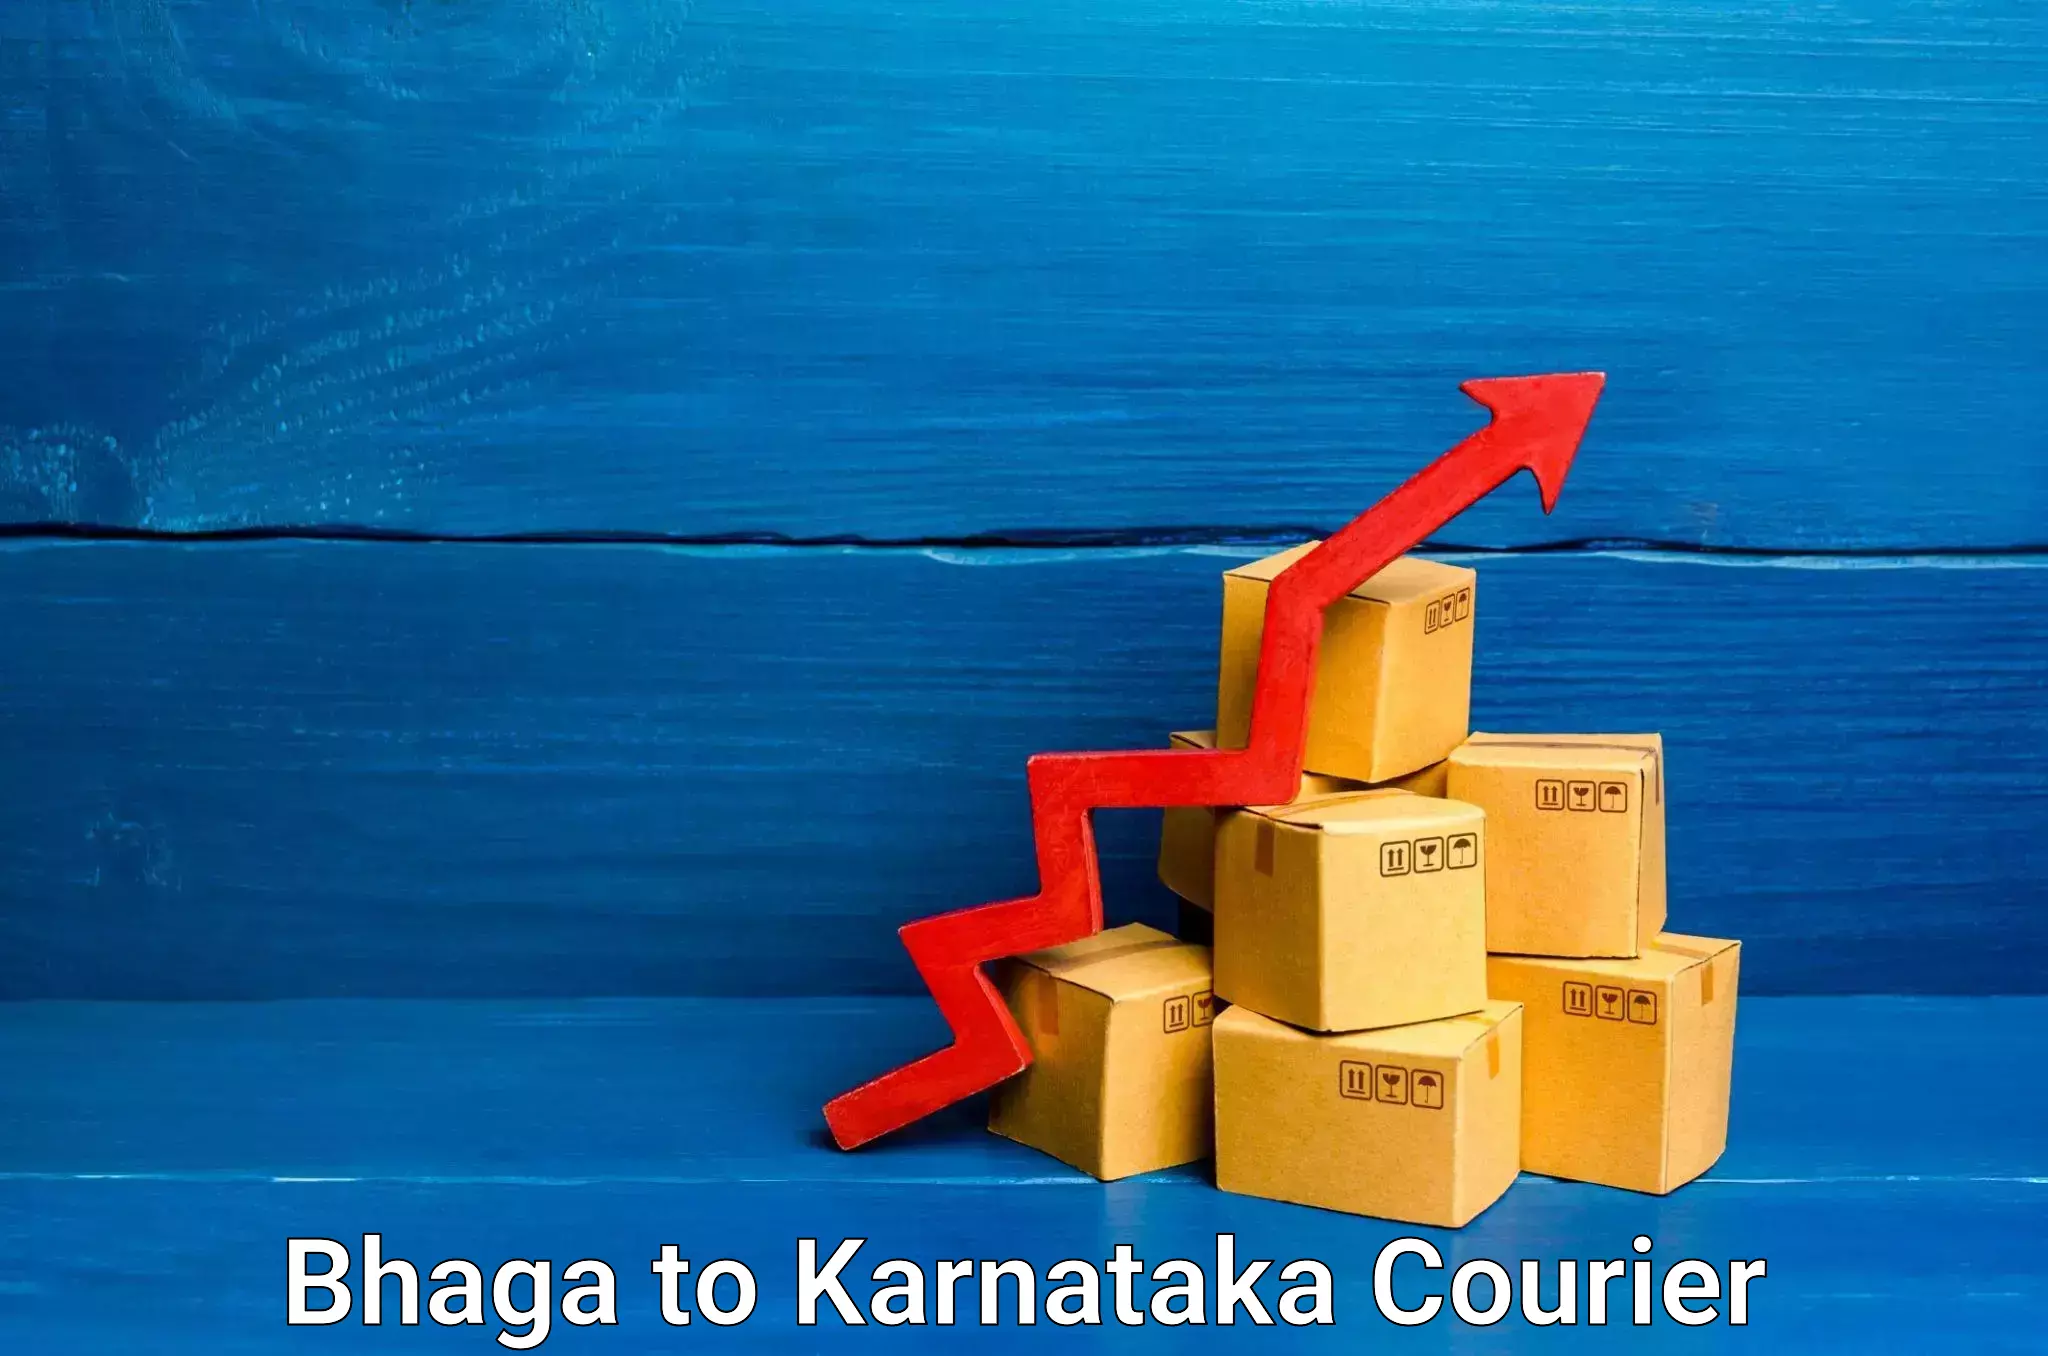 Cargo courier service Bhaga to Manipal Academy of Higher Education